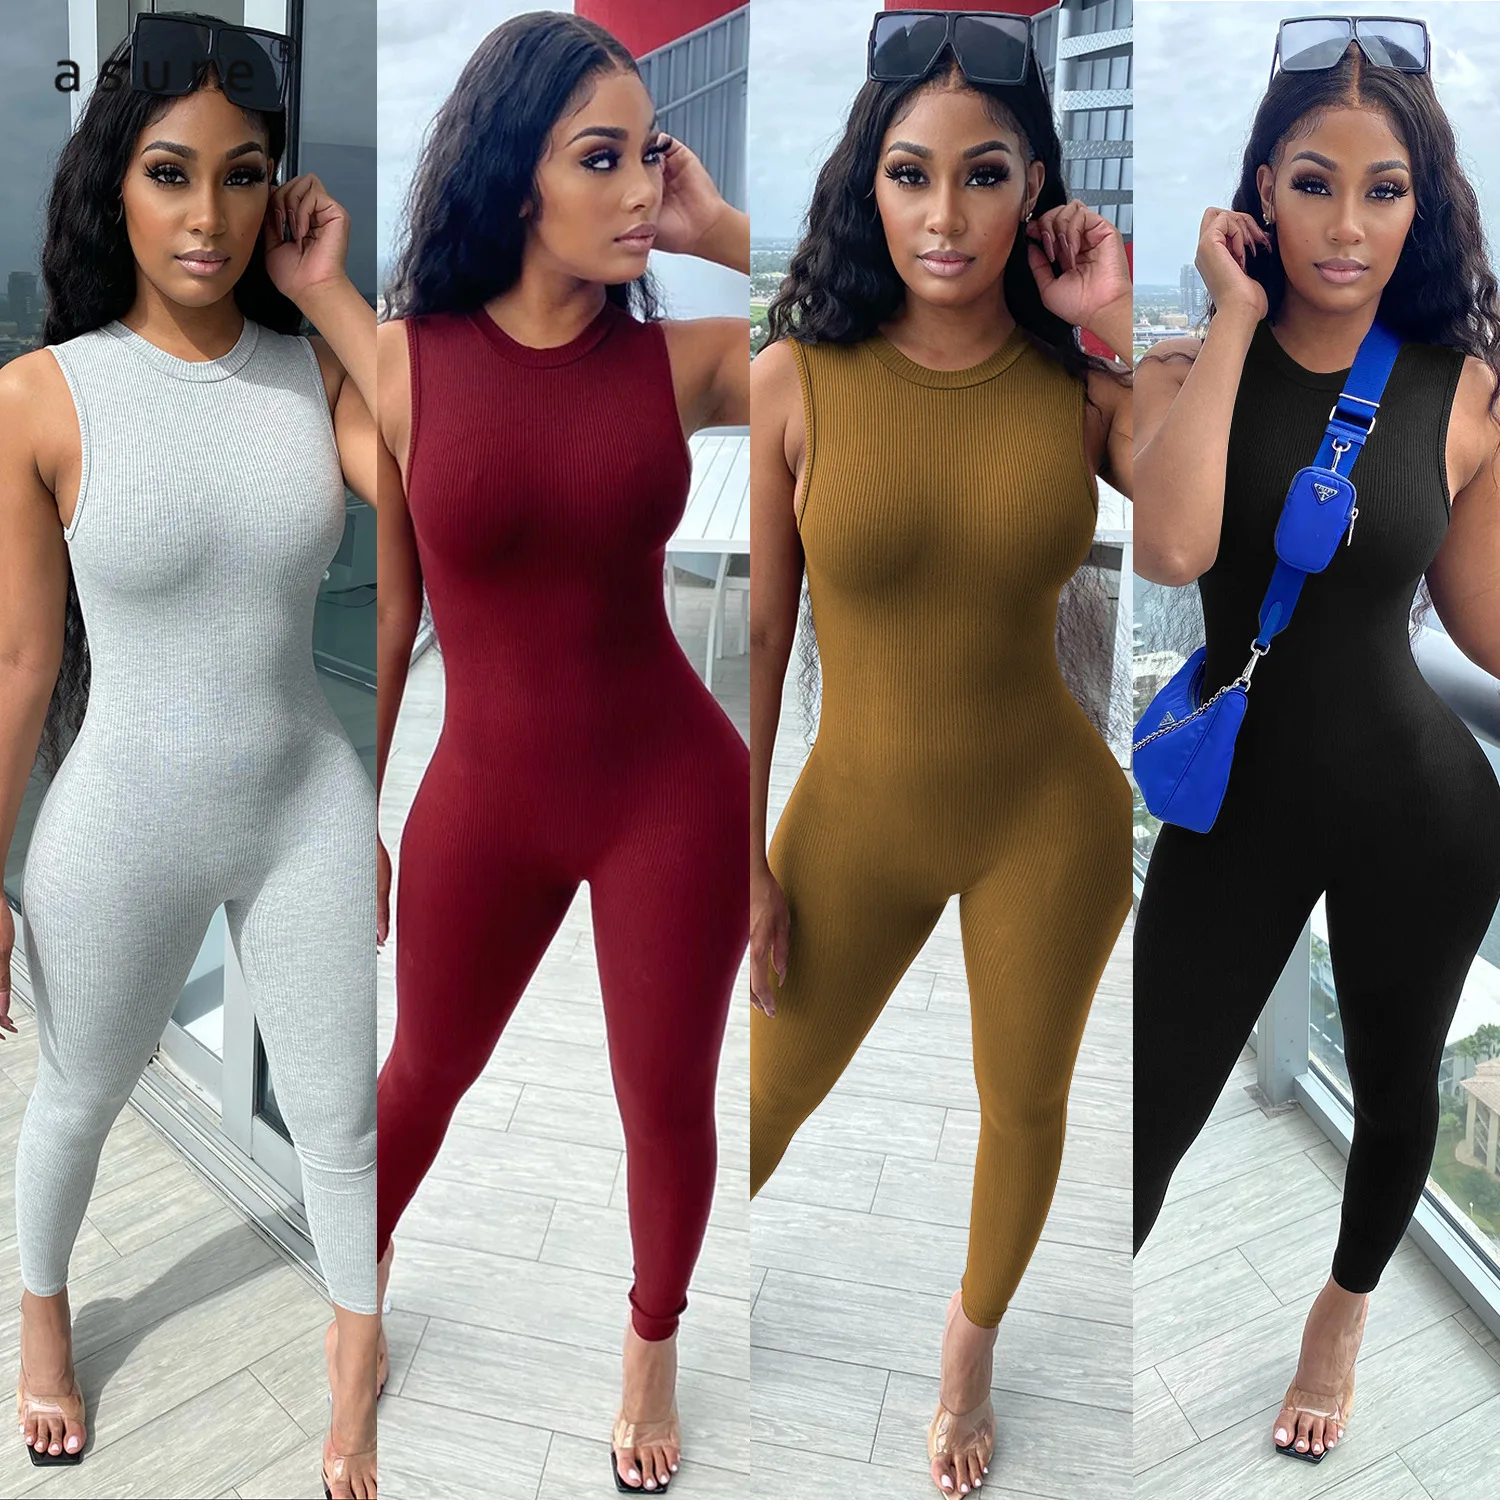 

Jumpsuit Women Pants Body Black Overalls Sexy Femme Baddie Clothes One Piece Club Outfits Tracksuit Elegant Catsuit X3897